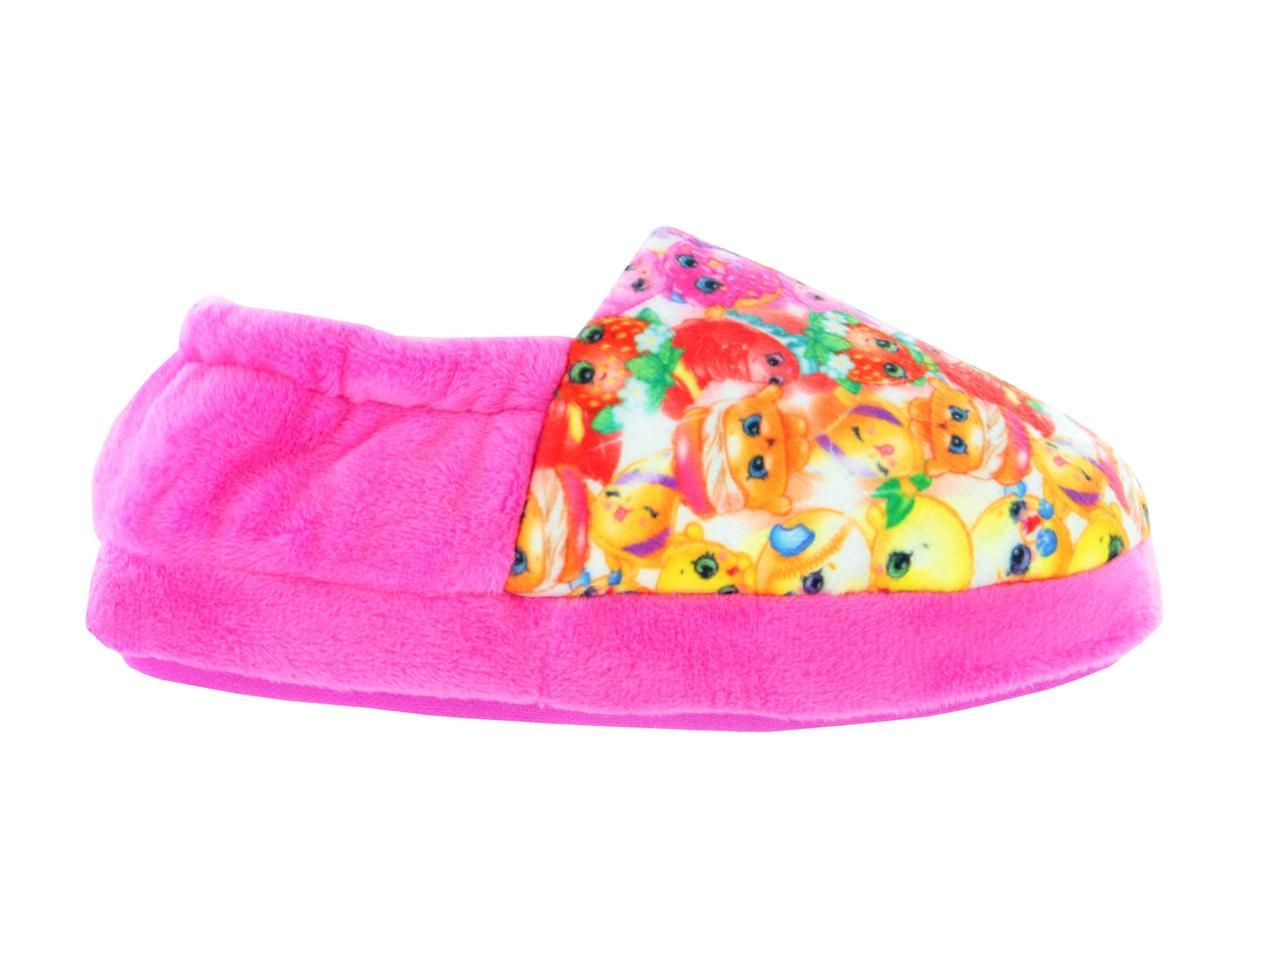 childrens size 7 slippers